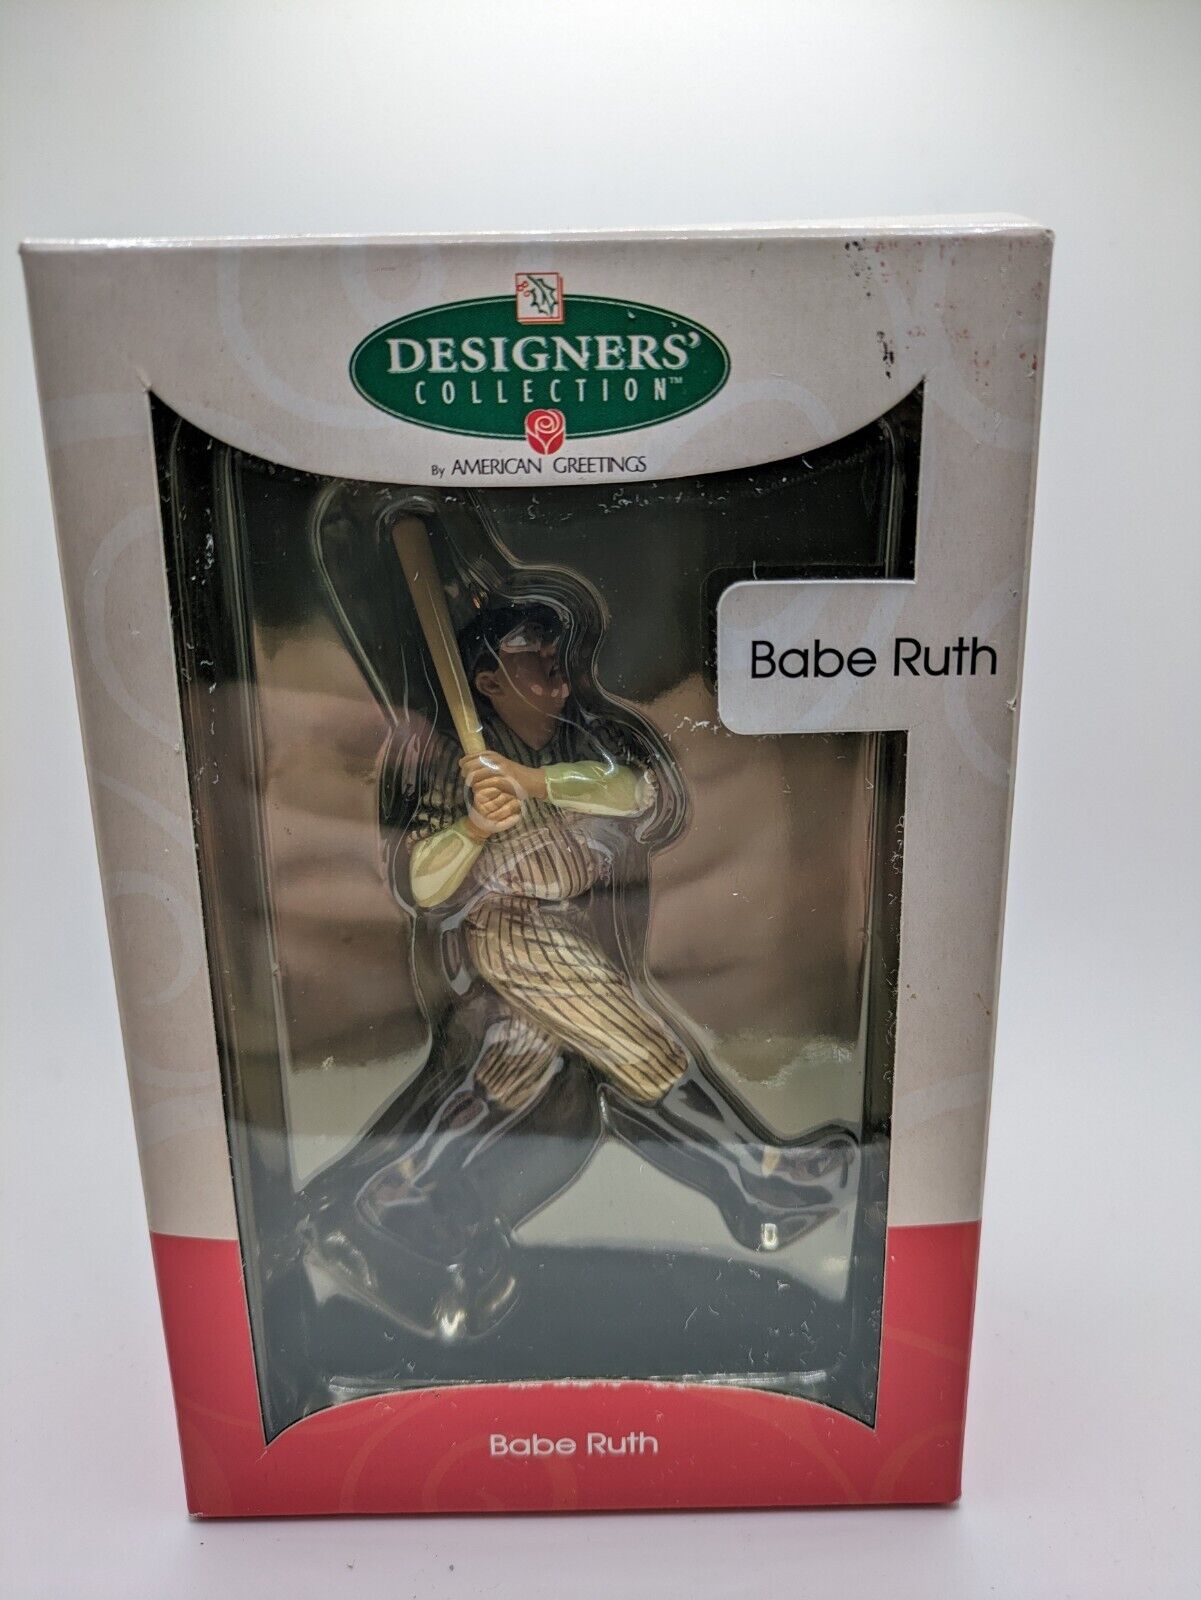 Babe Ruth American Greetings Designer's Collection Ornament